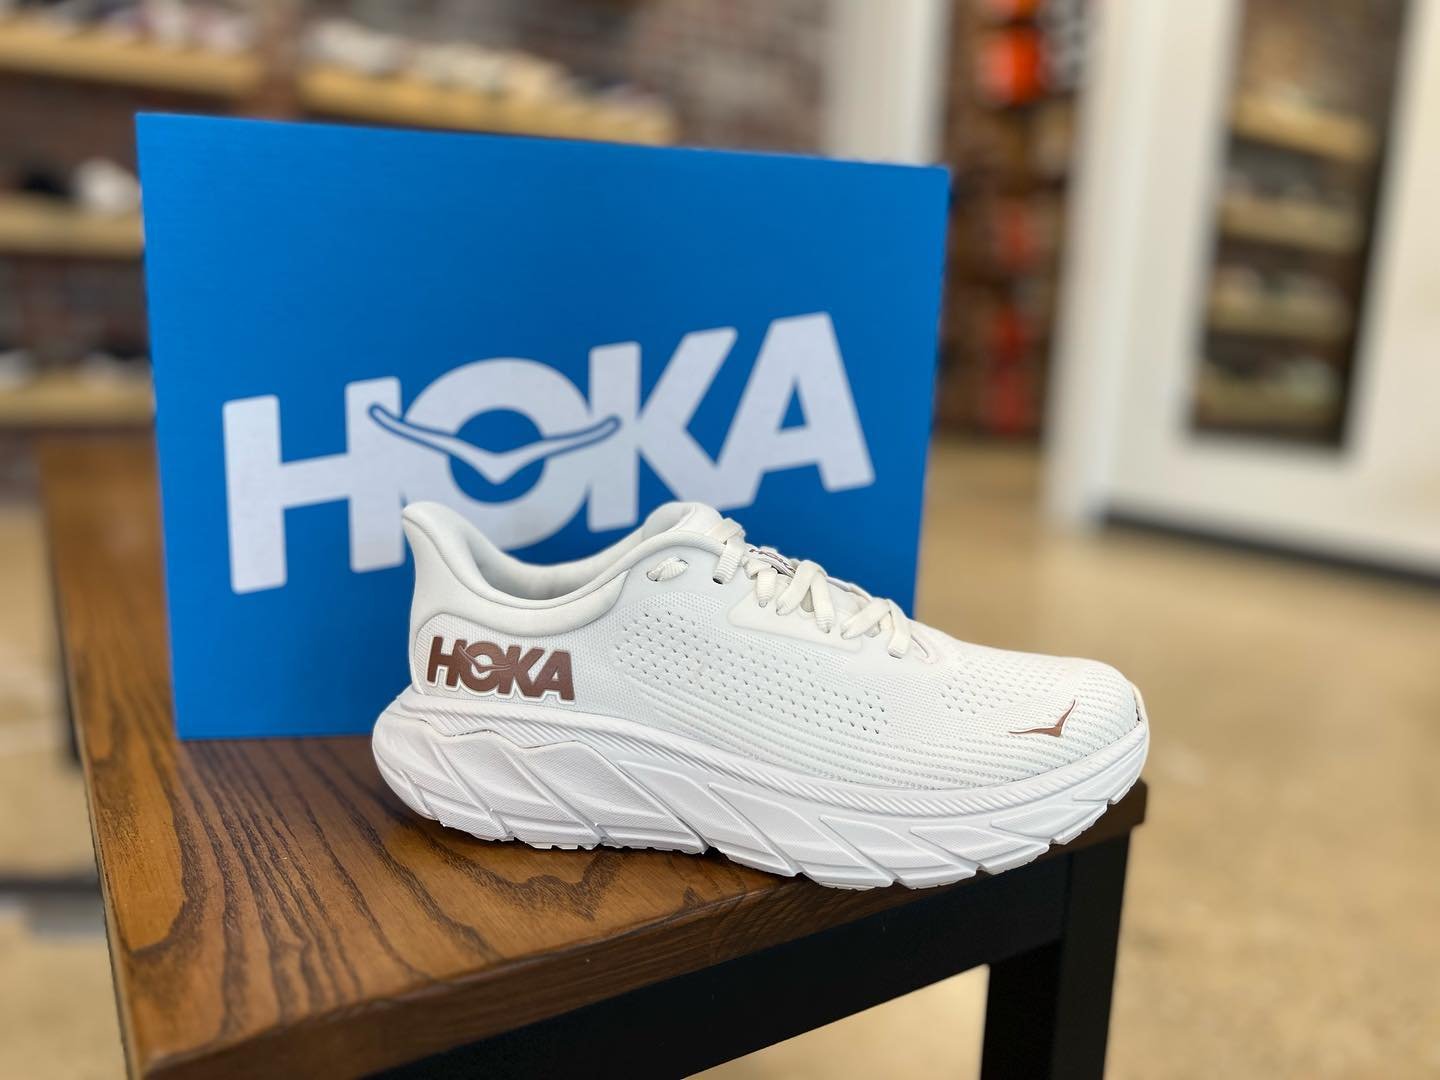 Freshen your footwear with a new Hoka Arahi 7 color!

This shoe not only offers awesome cushioning but also stability and durability for running, walking or casual wear!

Check out the latest in our Hoka arrivals today at @wagnersrunwalk 

Mon-Sat 10